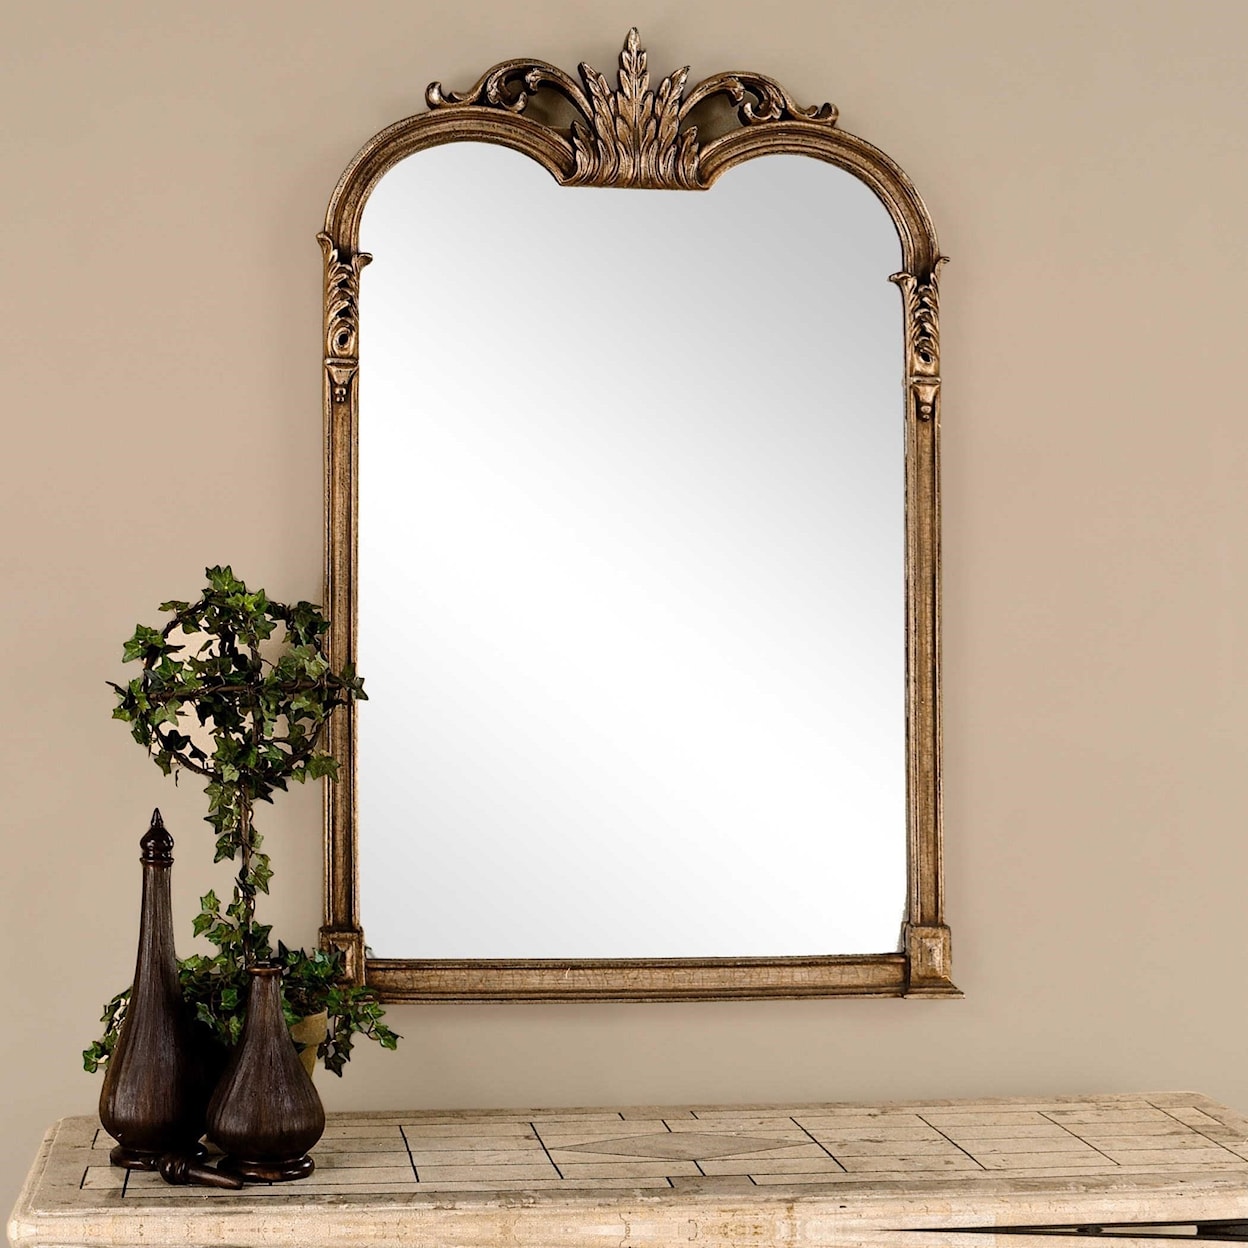 Uttermost Arched Mirrors Jacqueline Vanity Mirror